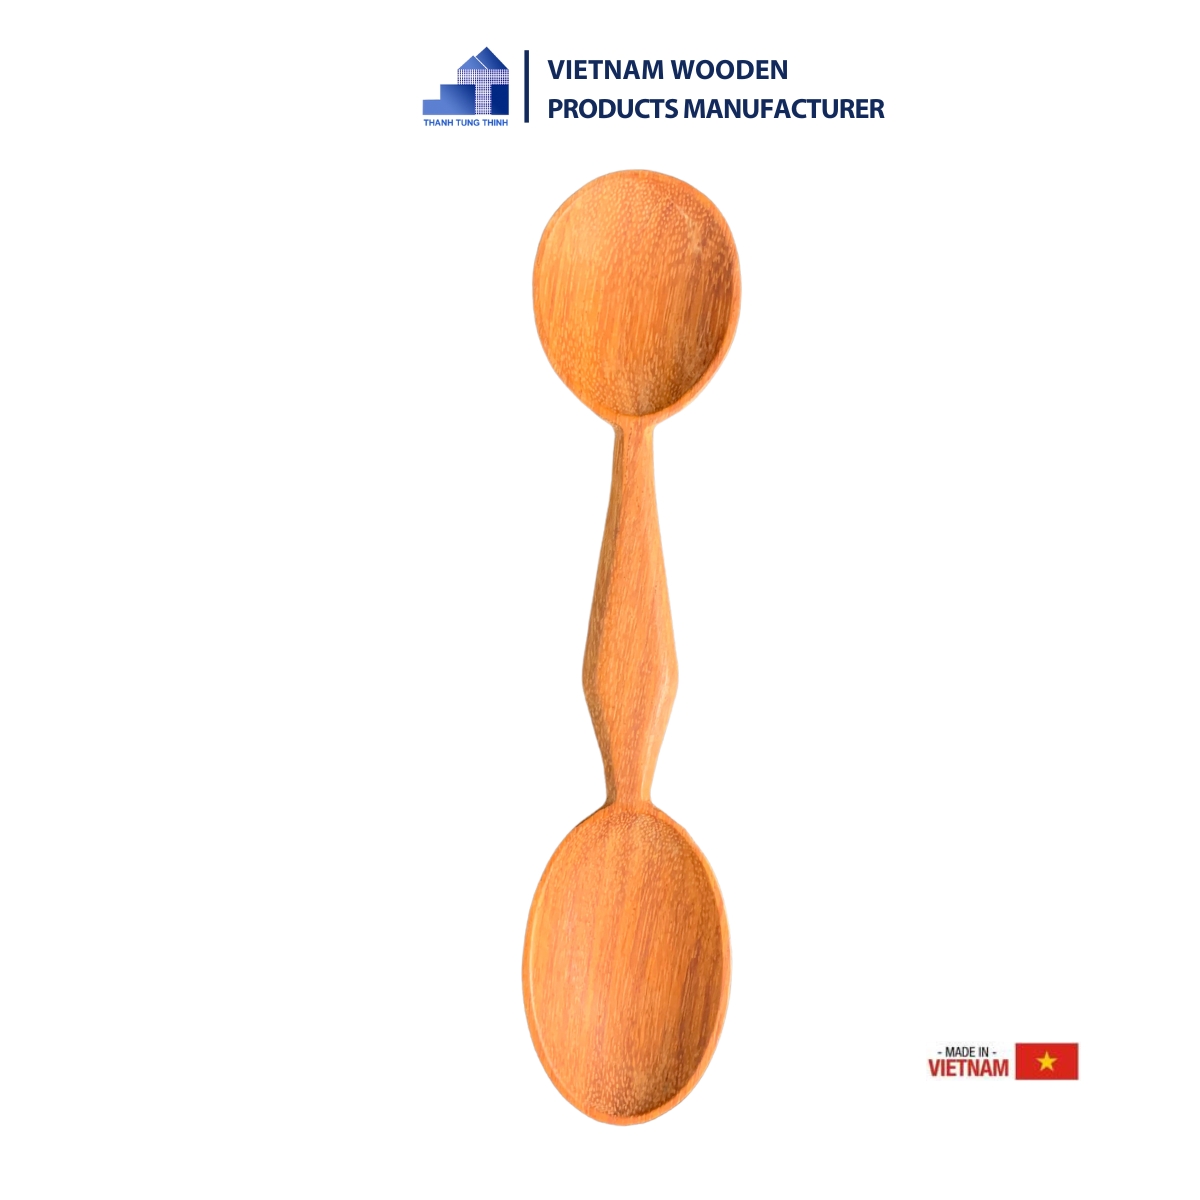 The product is a double-headed wooden spoon for children